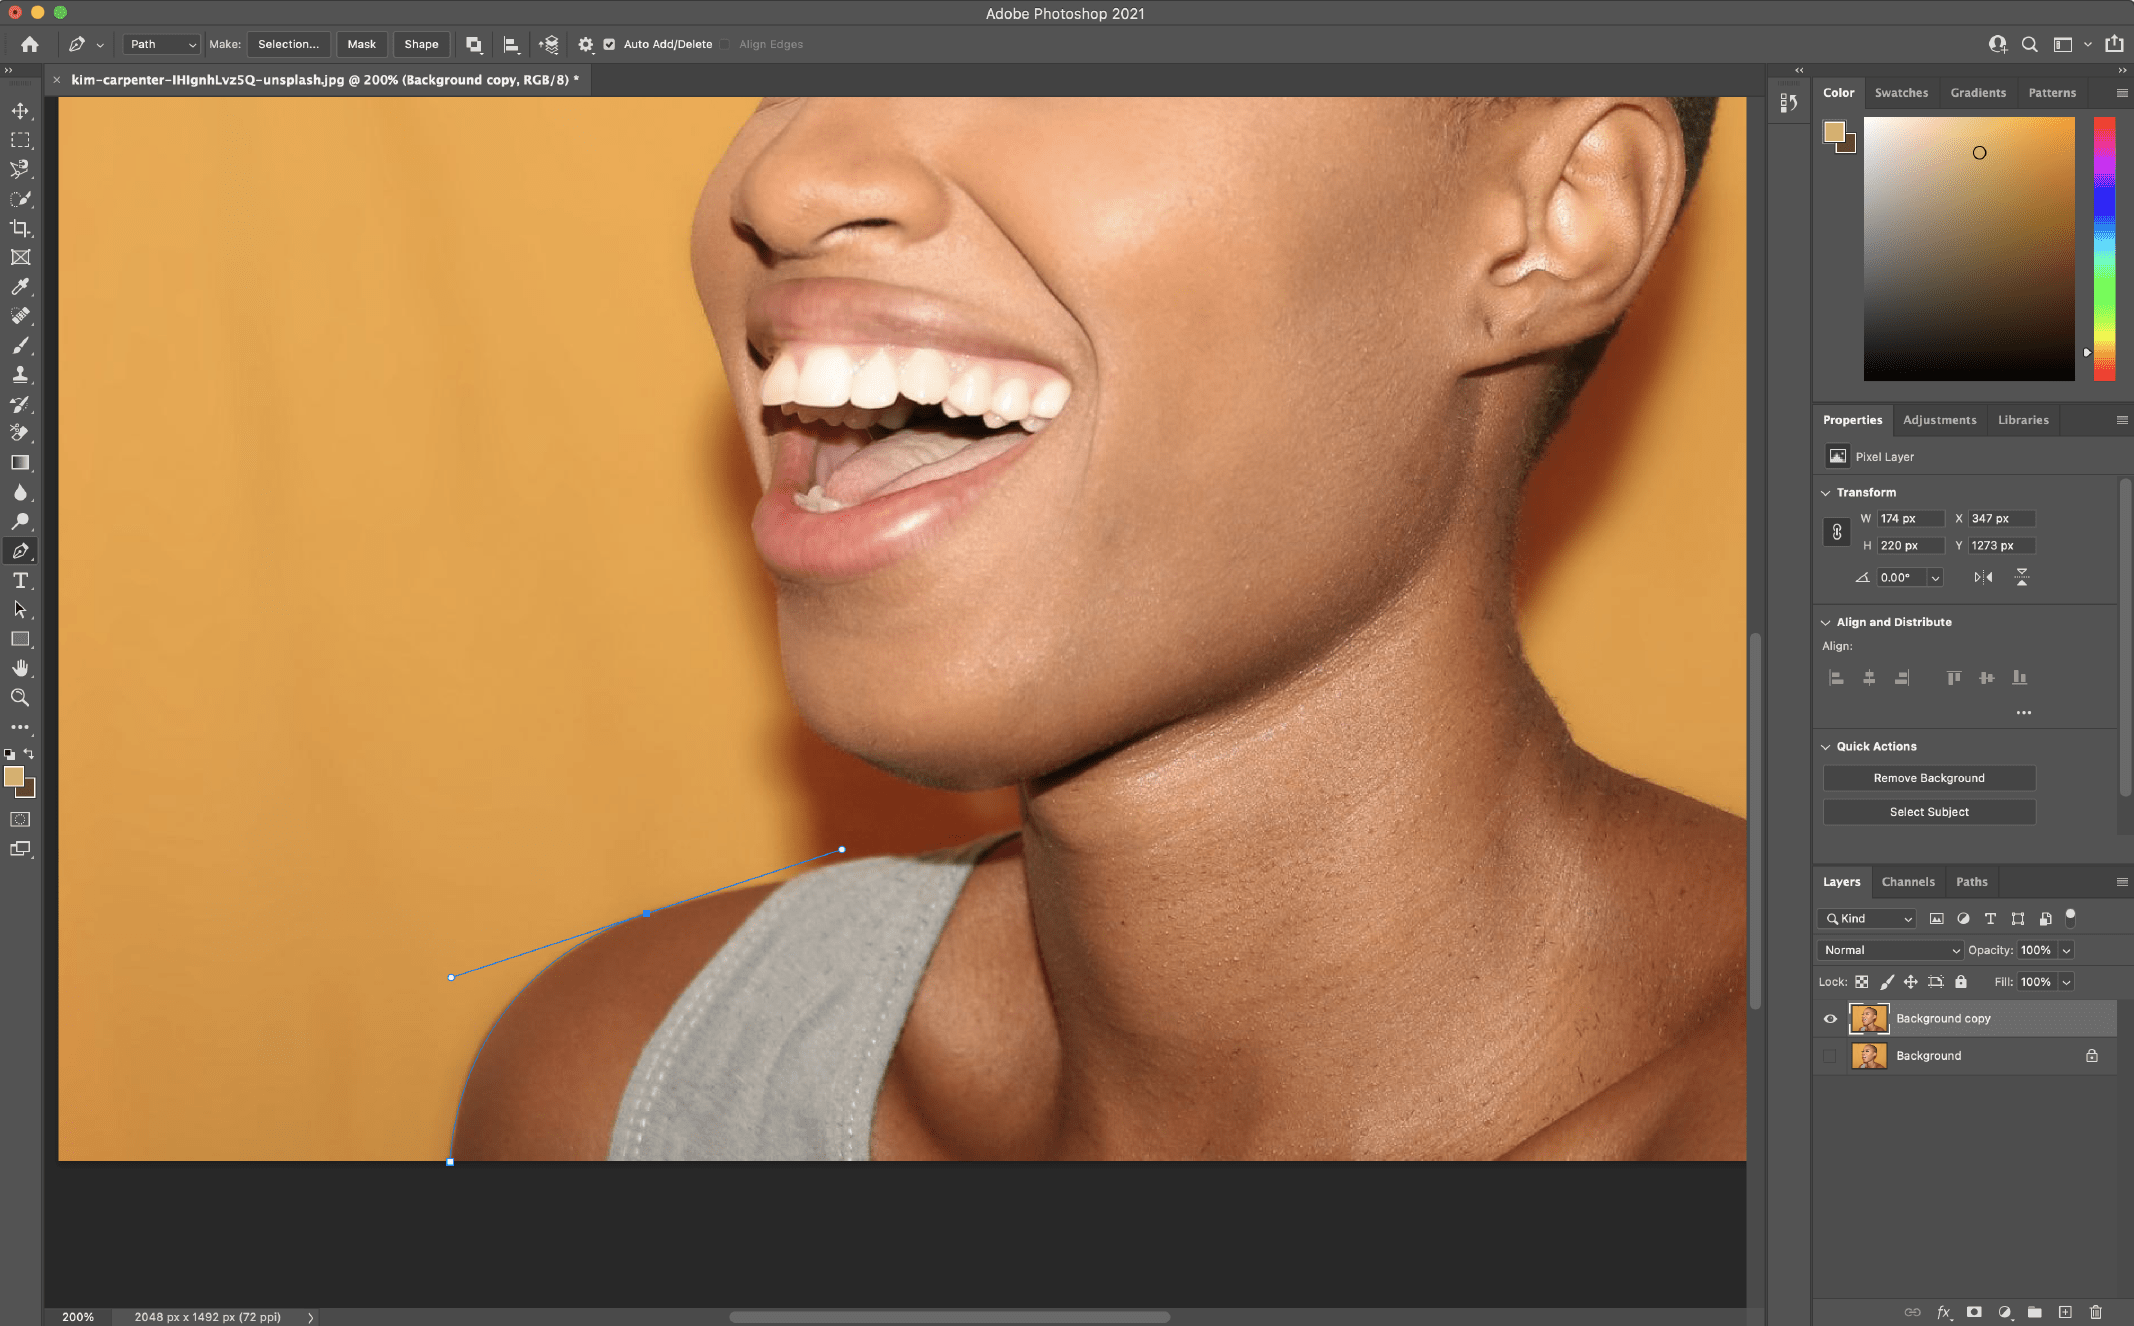 Remove Background in Photoshop using the Pen Tool 1